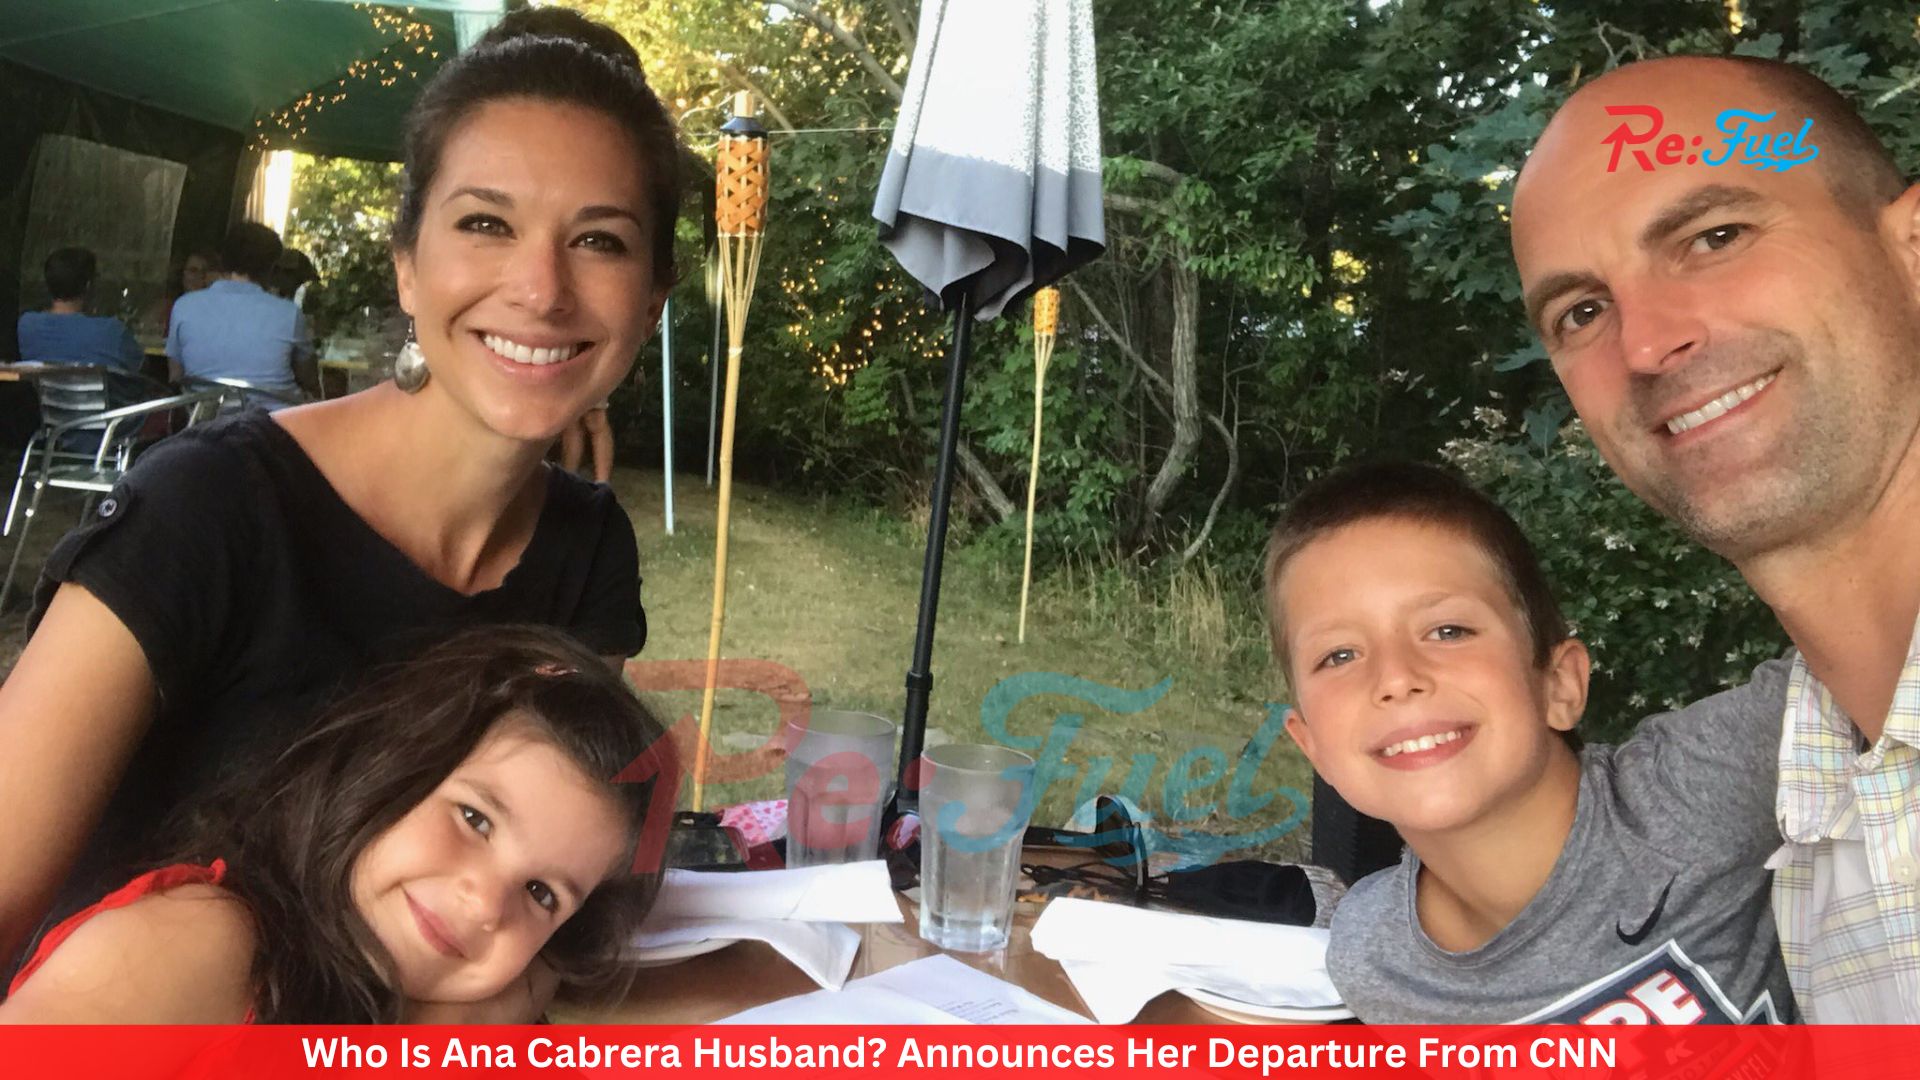 Who Is Ana Cabrera Husband? Announces Her Departure From CNN